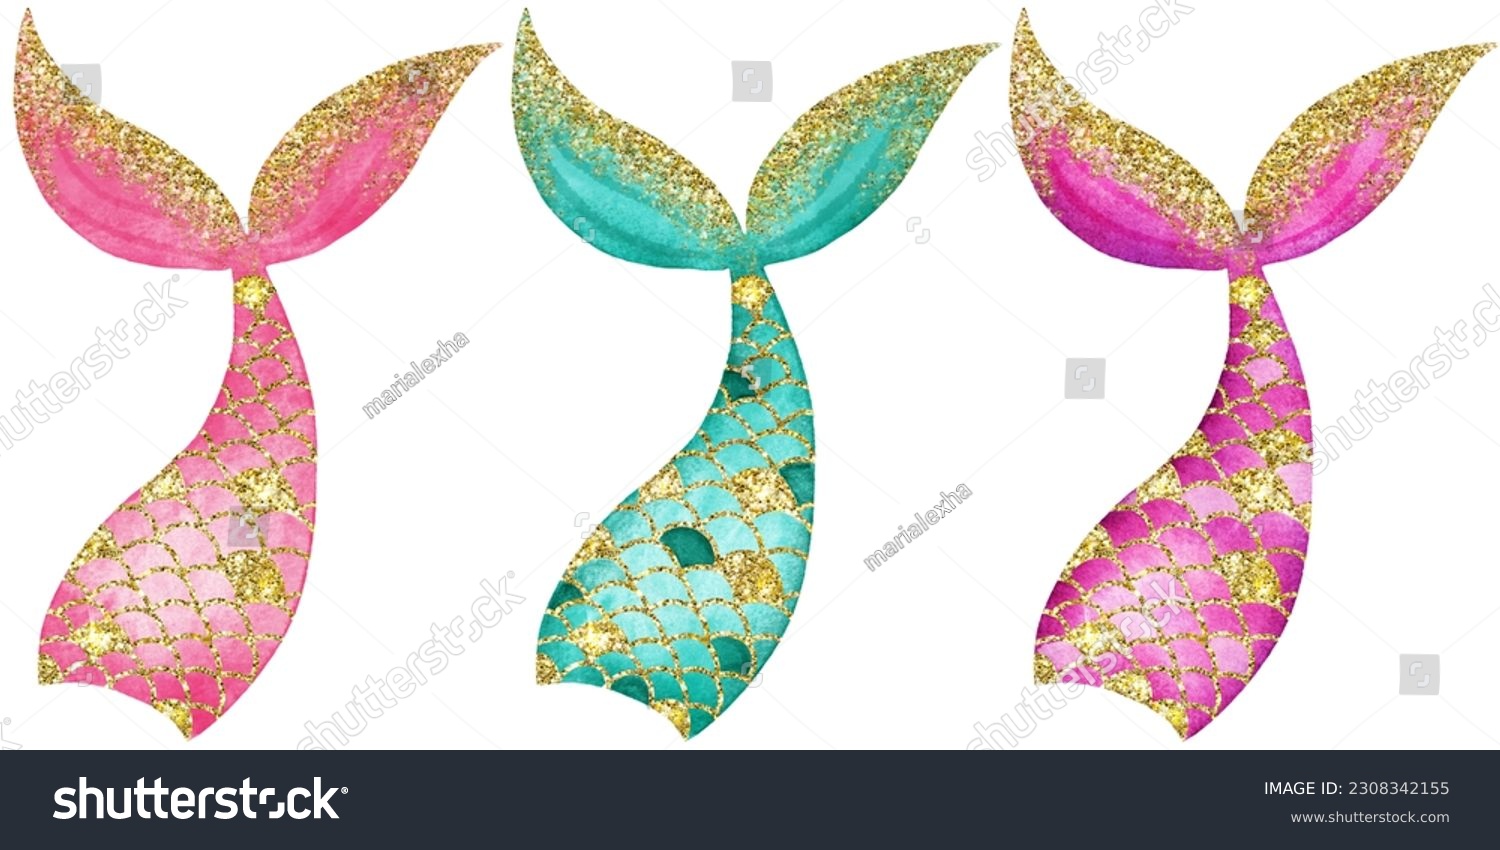 Mermaid tail drawing images stock photos d objects vectors